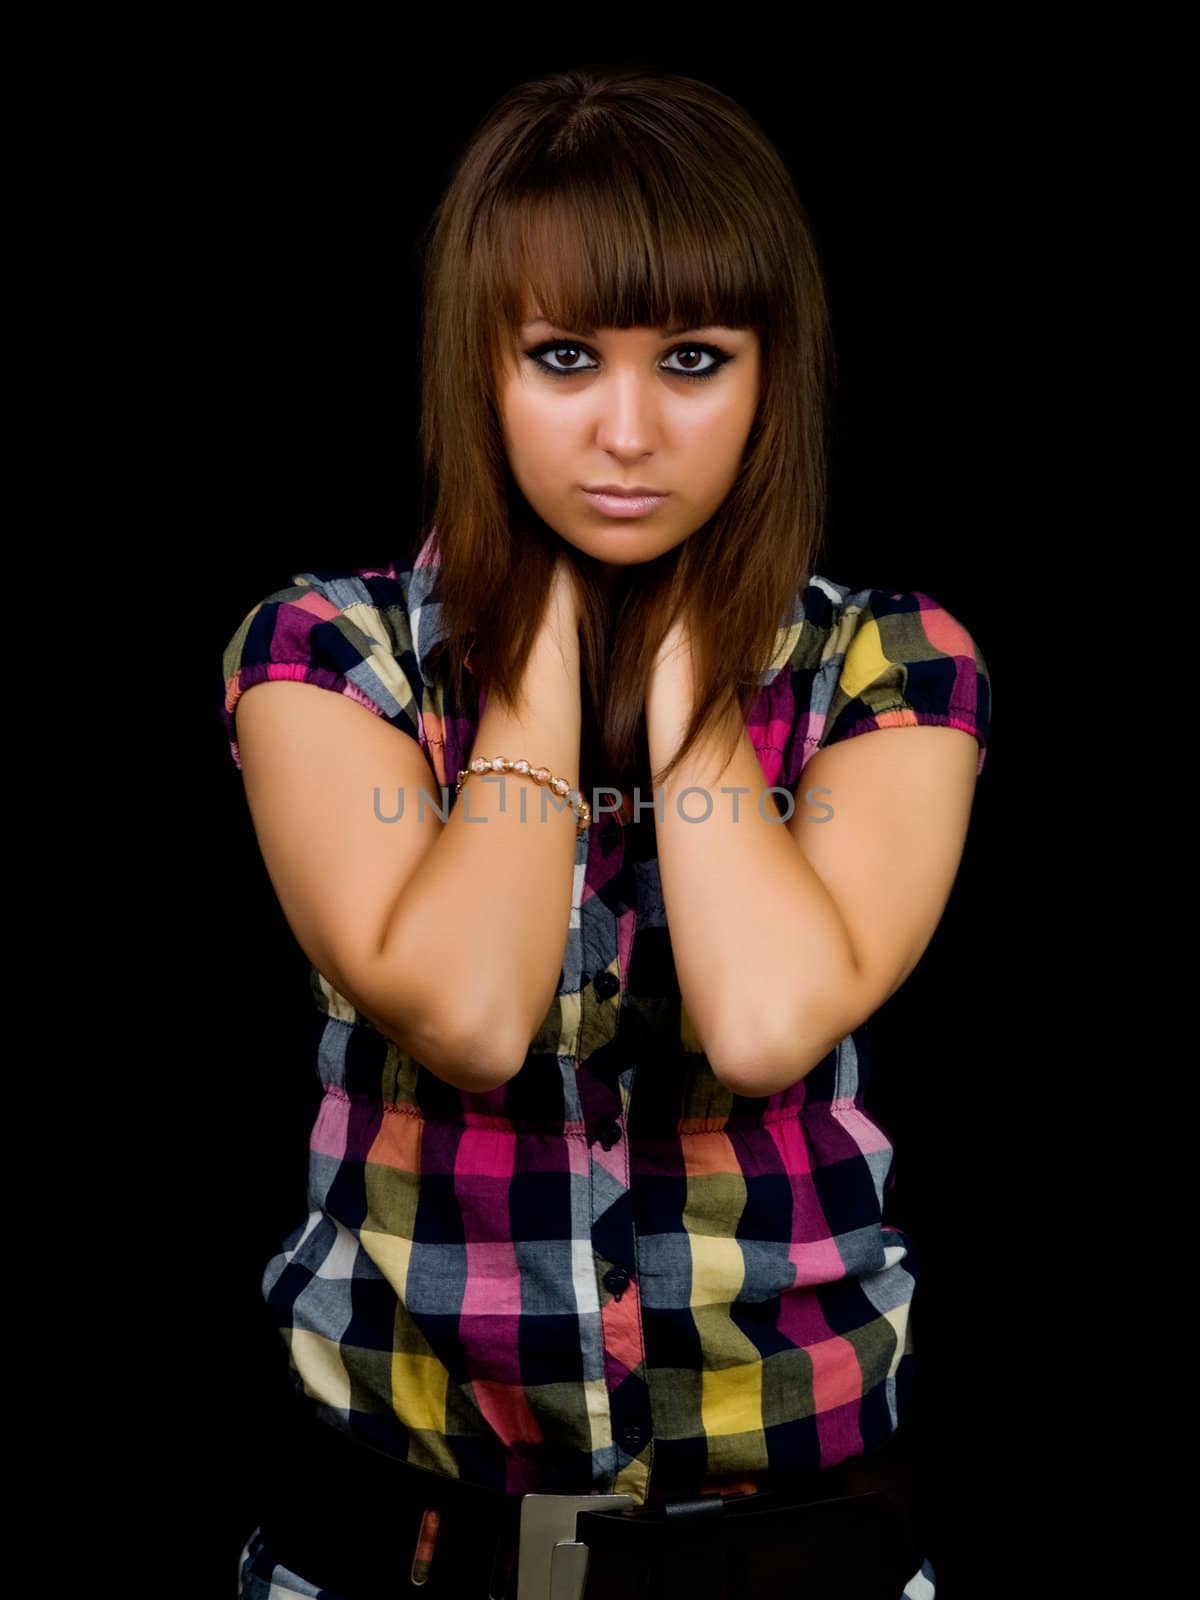 Portrait of a young girl on black background 